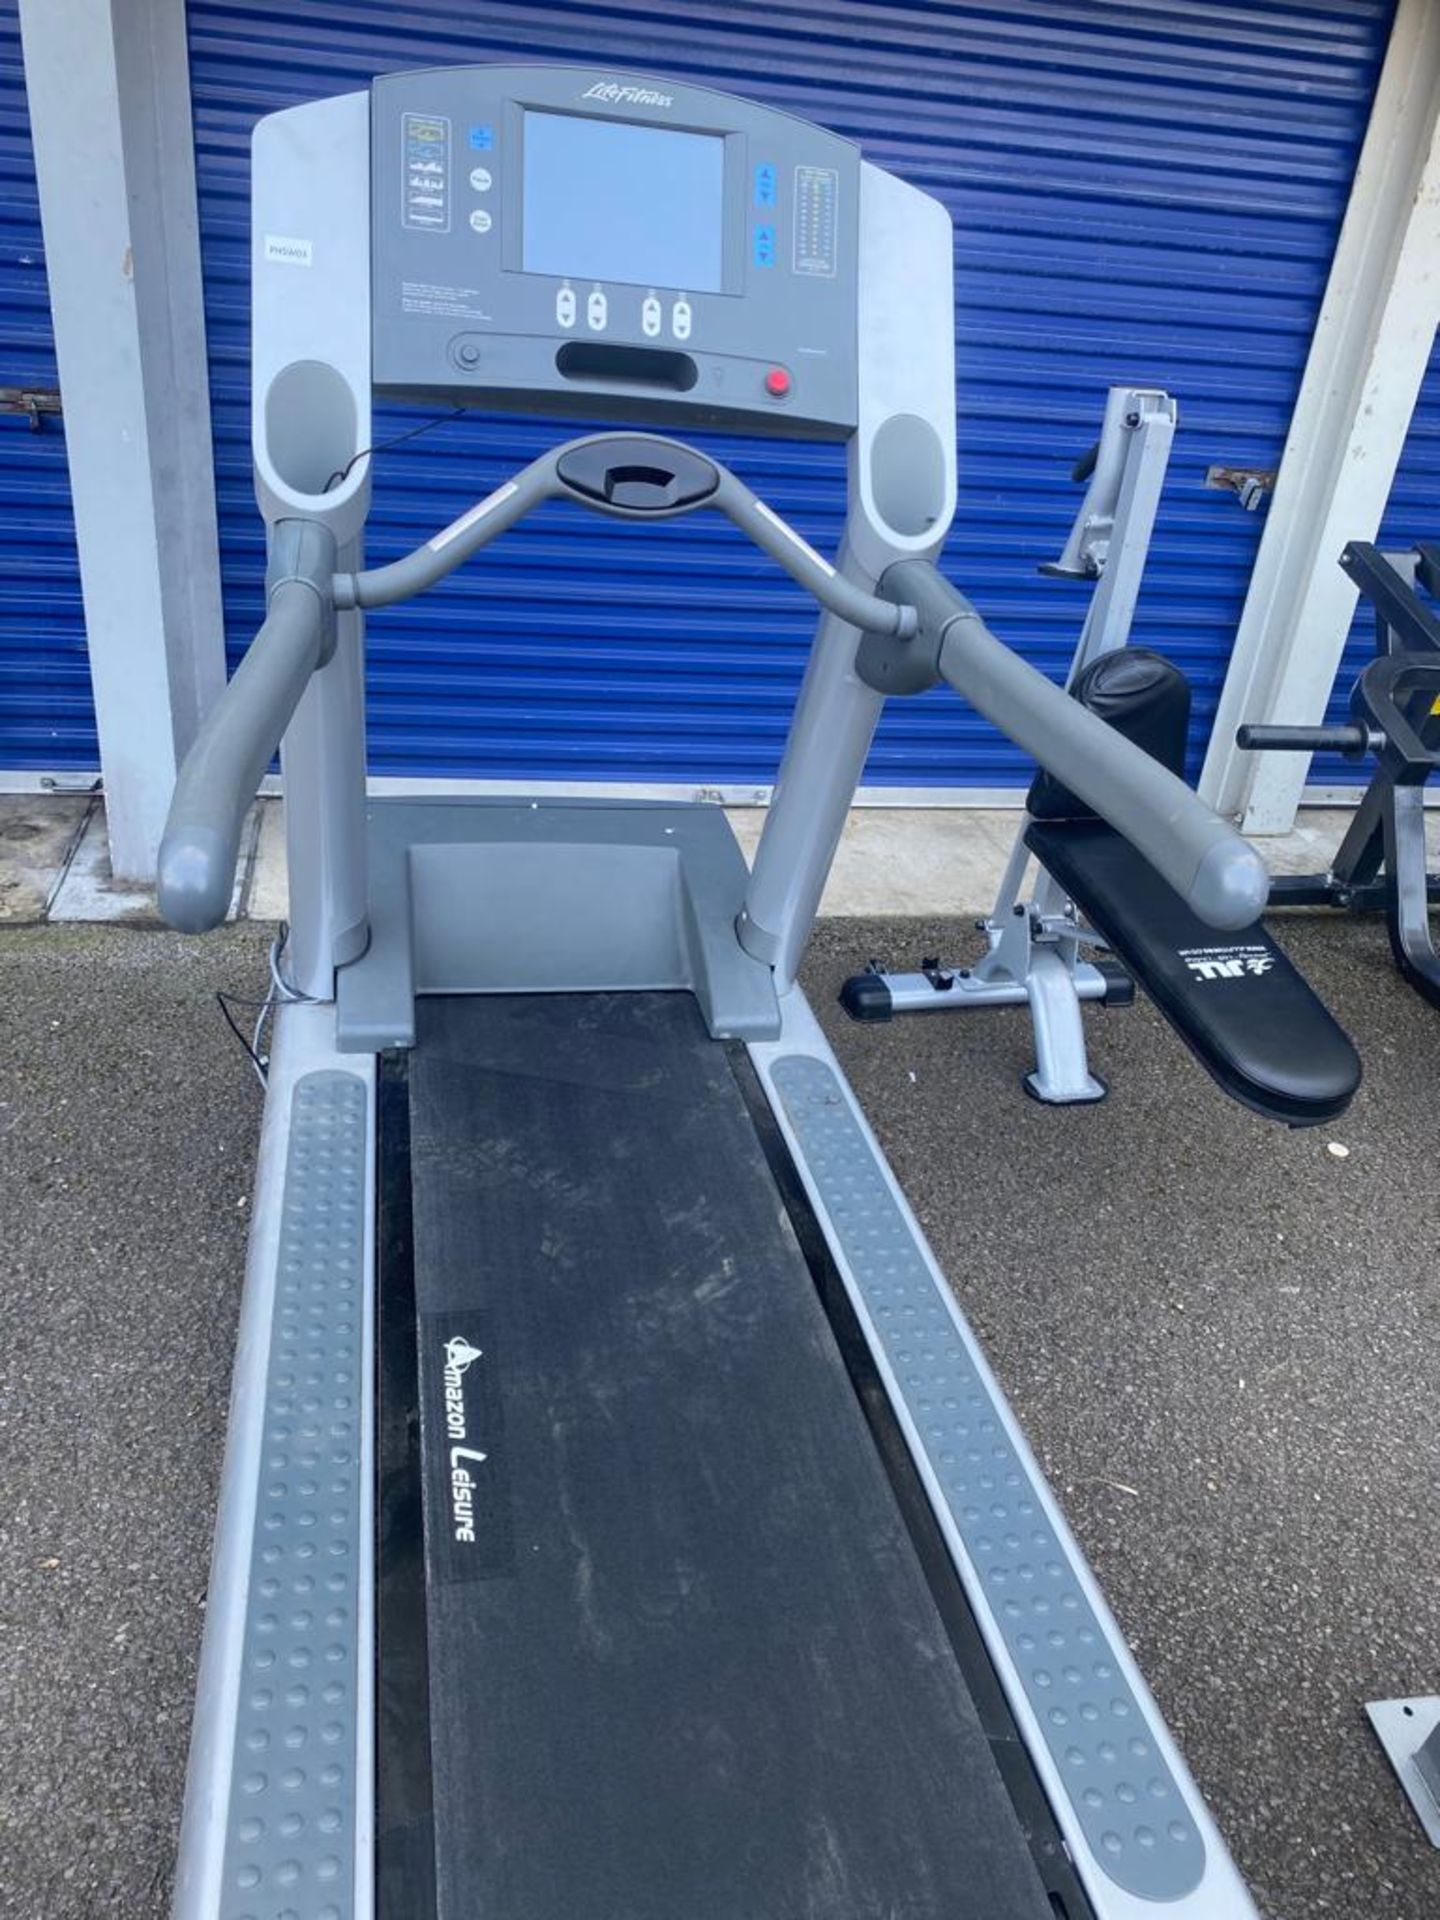 1 x Life Fitness T9E Light Commercial Treadmill Running Machine With Media Connections. - Image 2 of 4